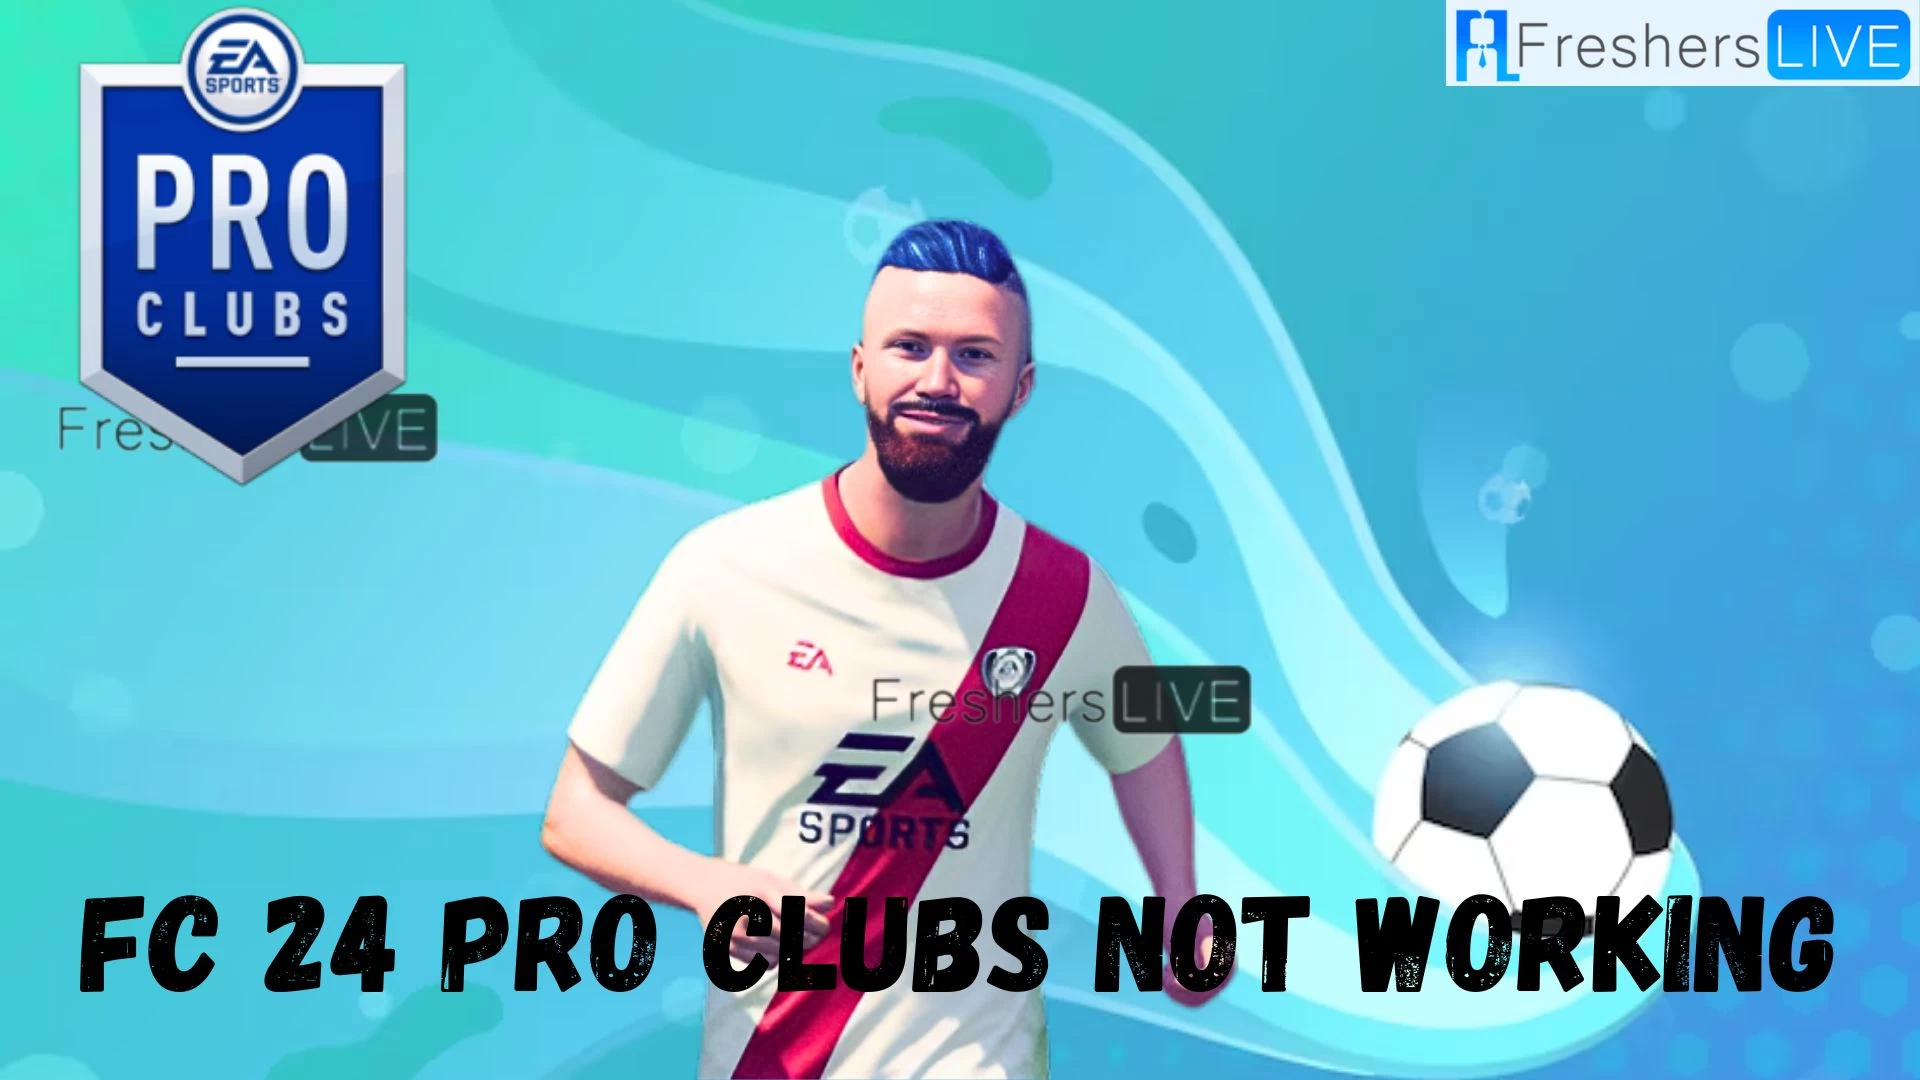 FC 24 Pro Clubs Not Working, How To Fix FC 24 Pro Clubs Not Working?